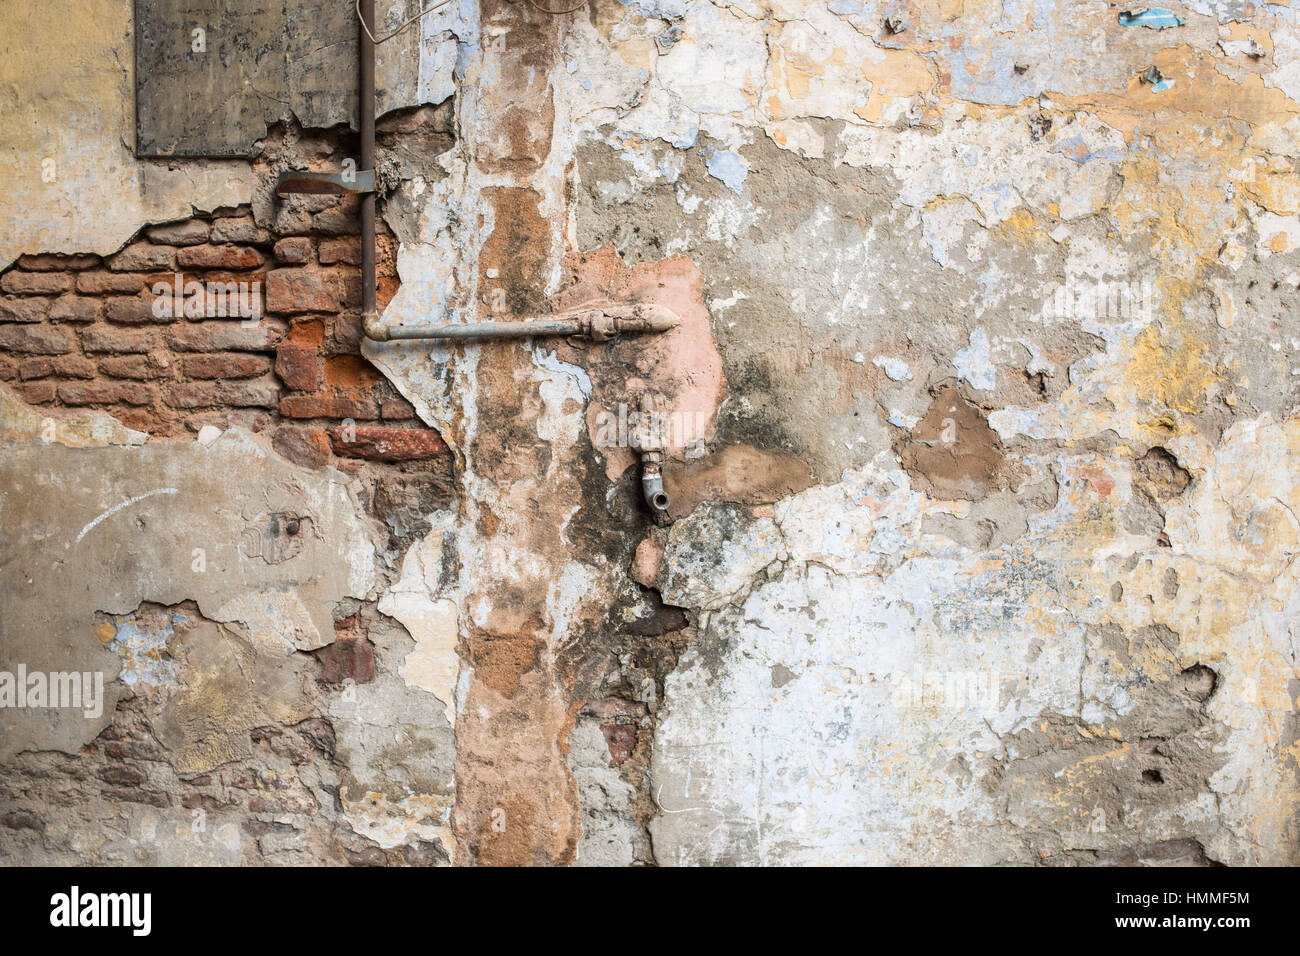 Drainage pipe protruding from dilapidated wall in Delhi Stock Photo